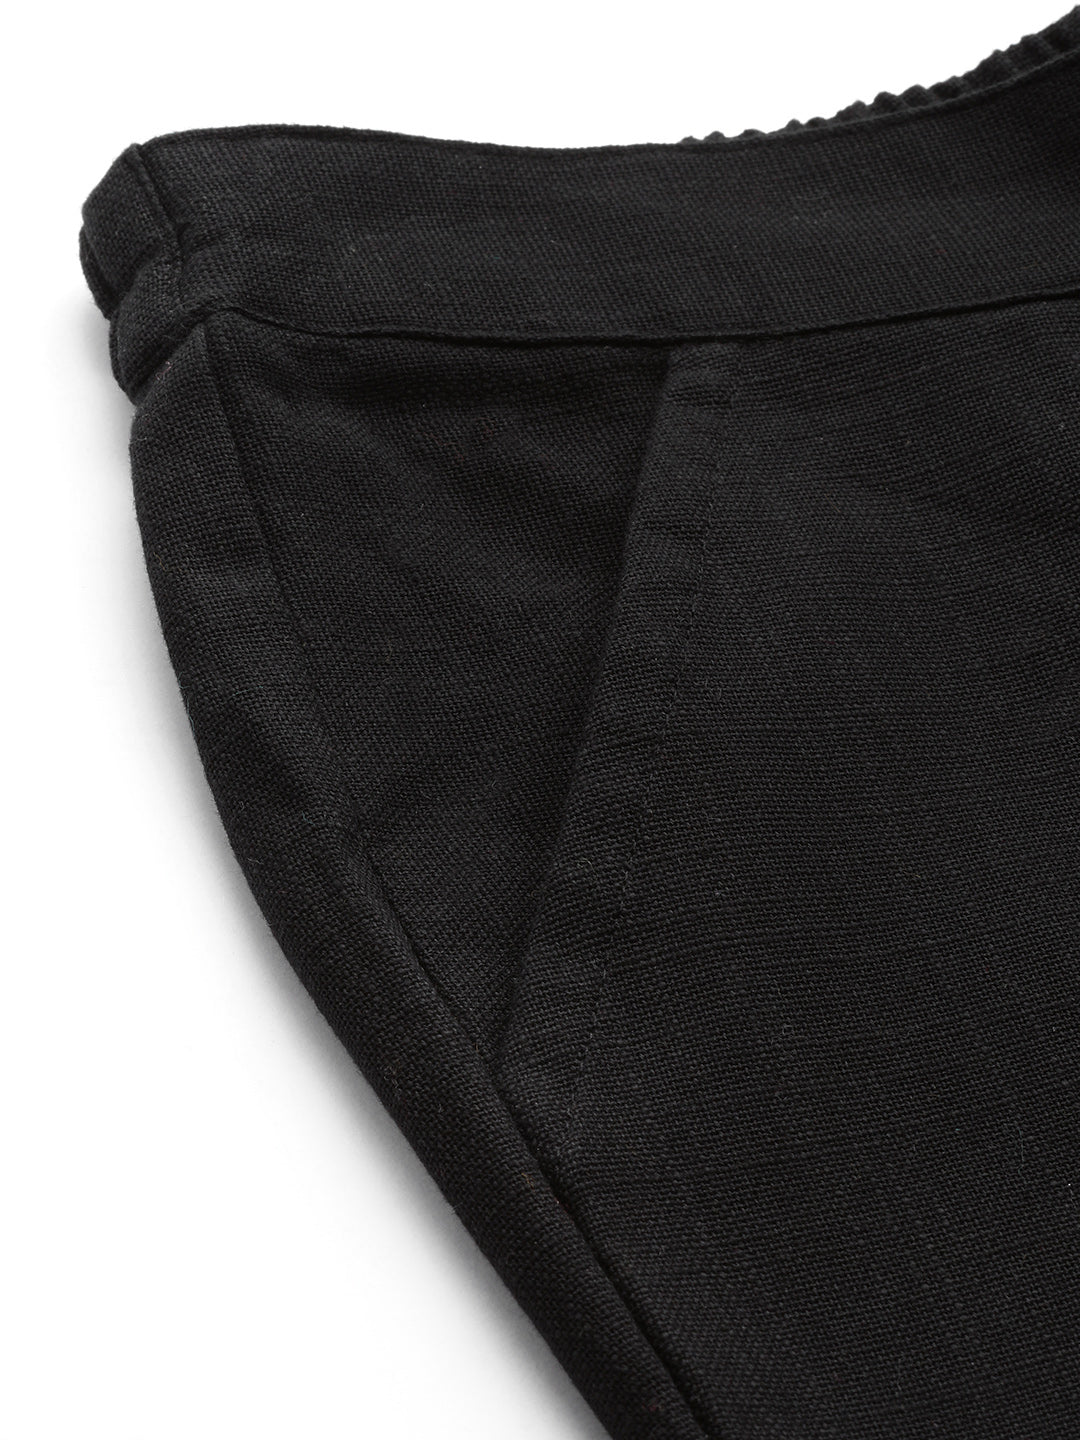 Raven Black Rayon Solid Slim Fit Trousers